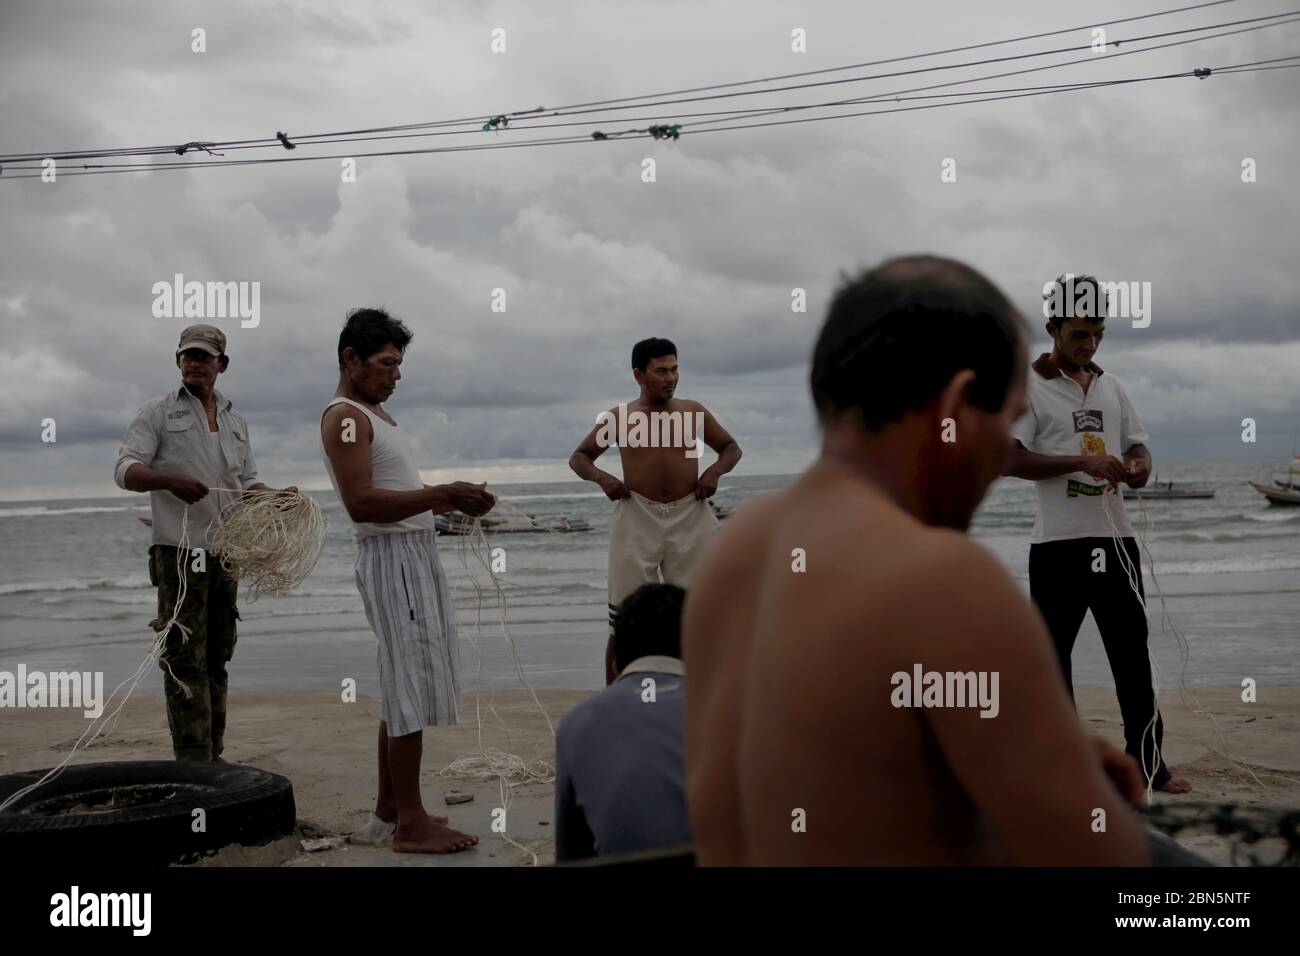 A fishing village in Sumatra west coast in December  Fishermen repairing fishing lines on the beach of Malabro village in Bengkulu, a city in Sumatra west coast facing Indian Ocean. Archival image. 1st December 2012. Stock Photo